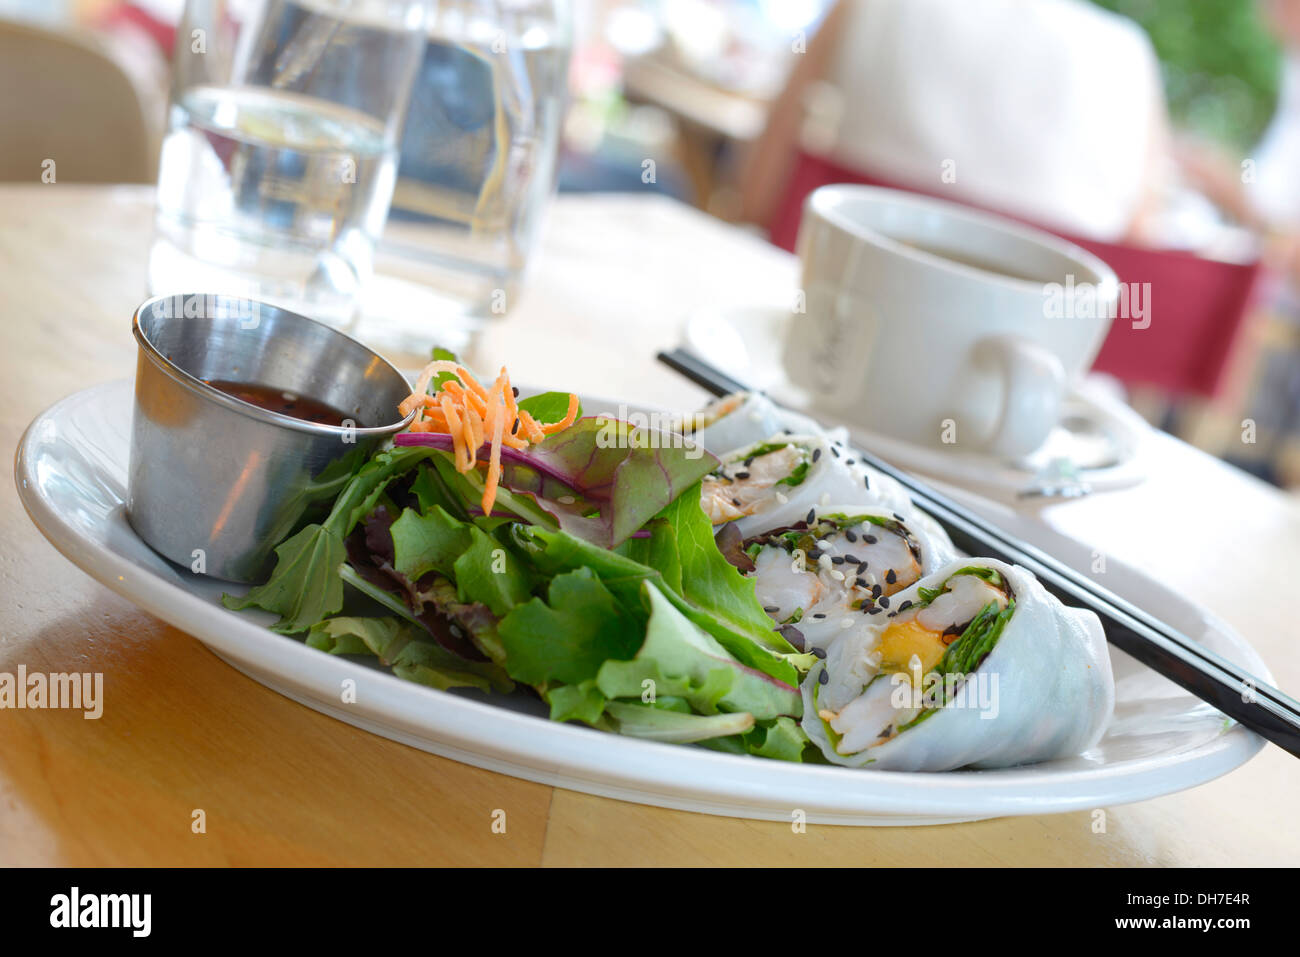 Babette’s is a restaurant in East Hampton NY Serving breakfast, lunch and dinner, using organic, local and seasonal ingredients. Stock Photo